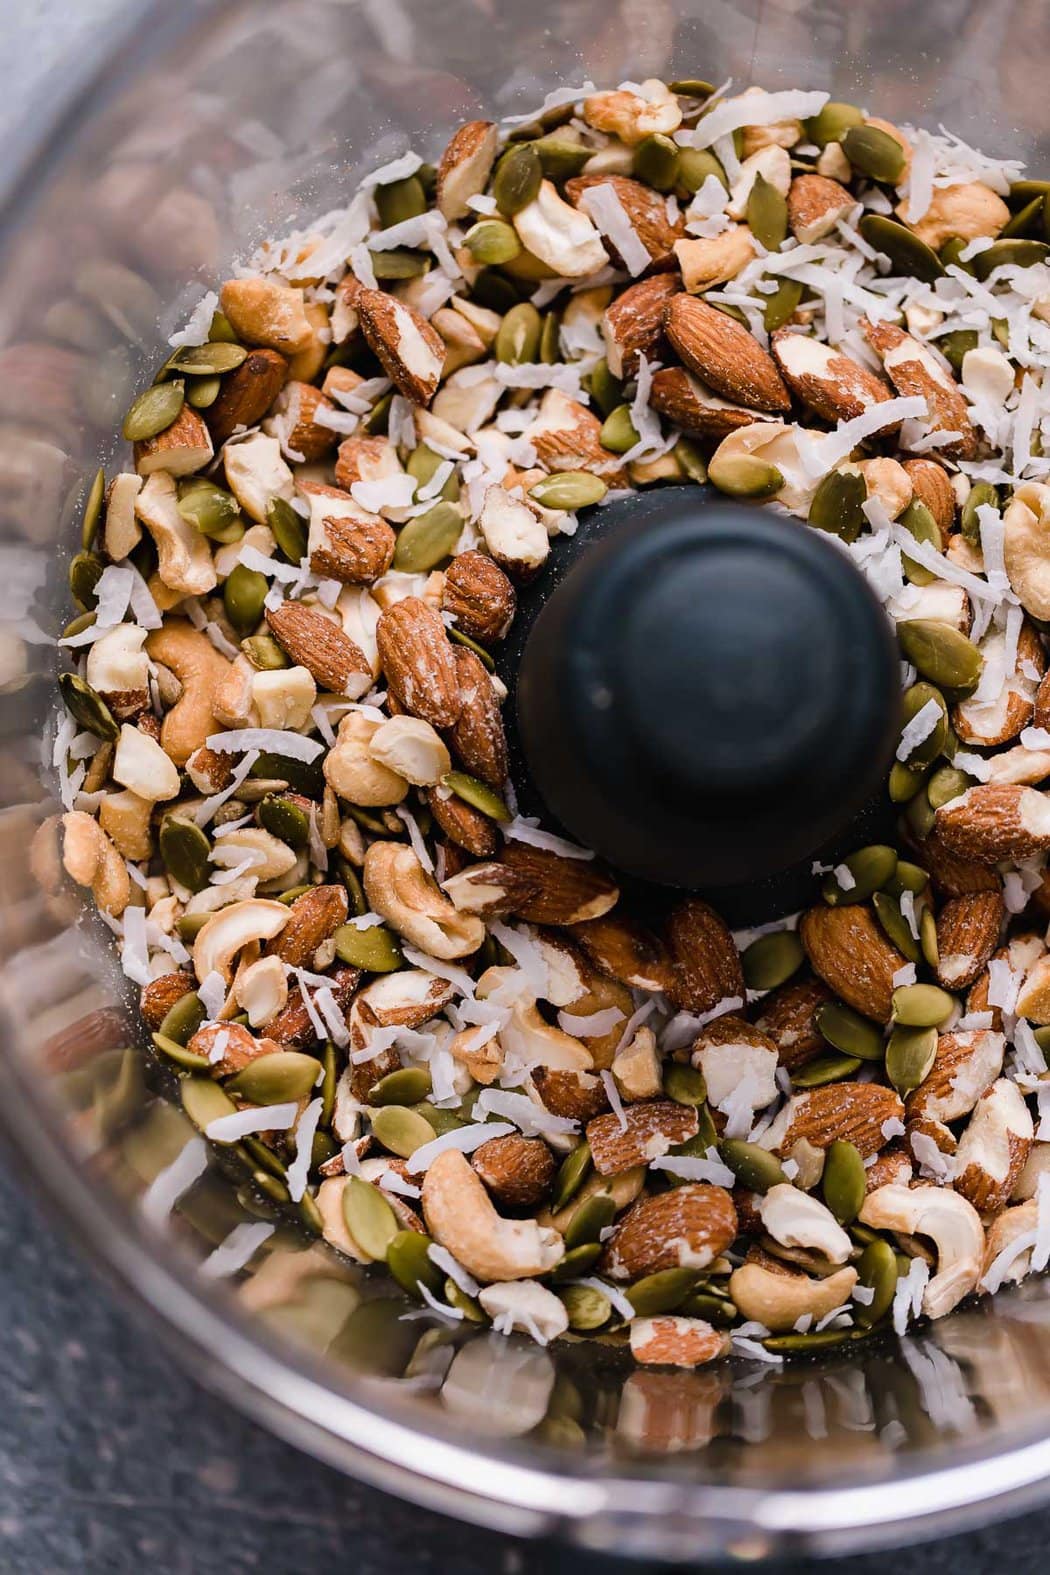 Food processor bowl filled with almonds, cashews, pepitas, and coconut shreds